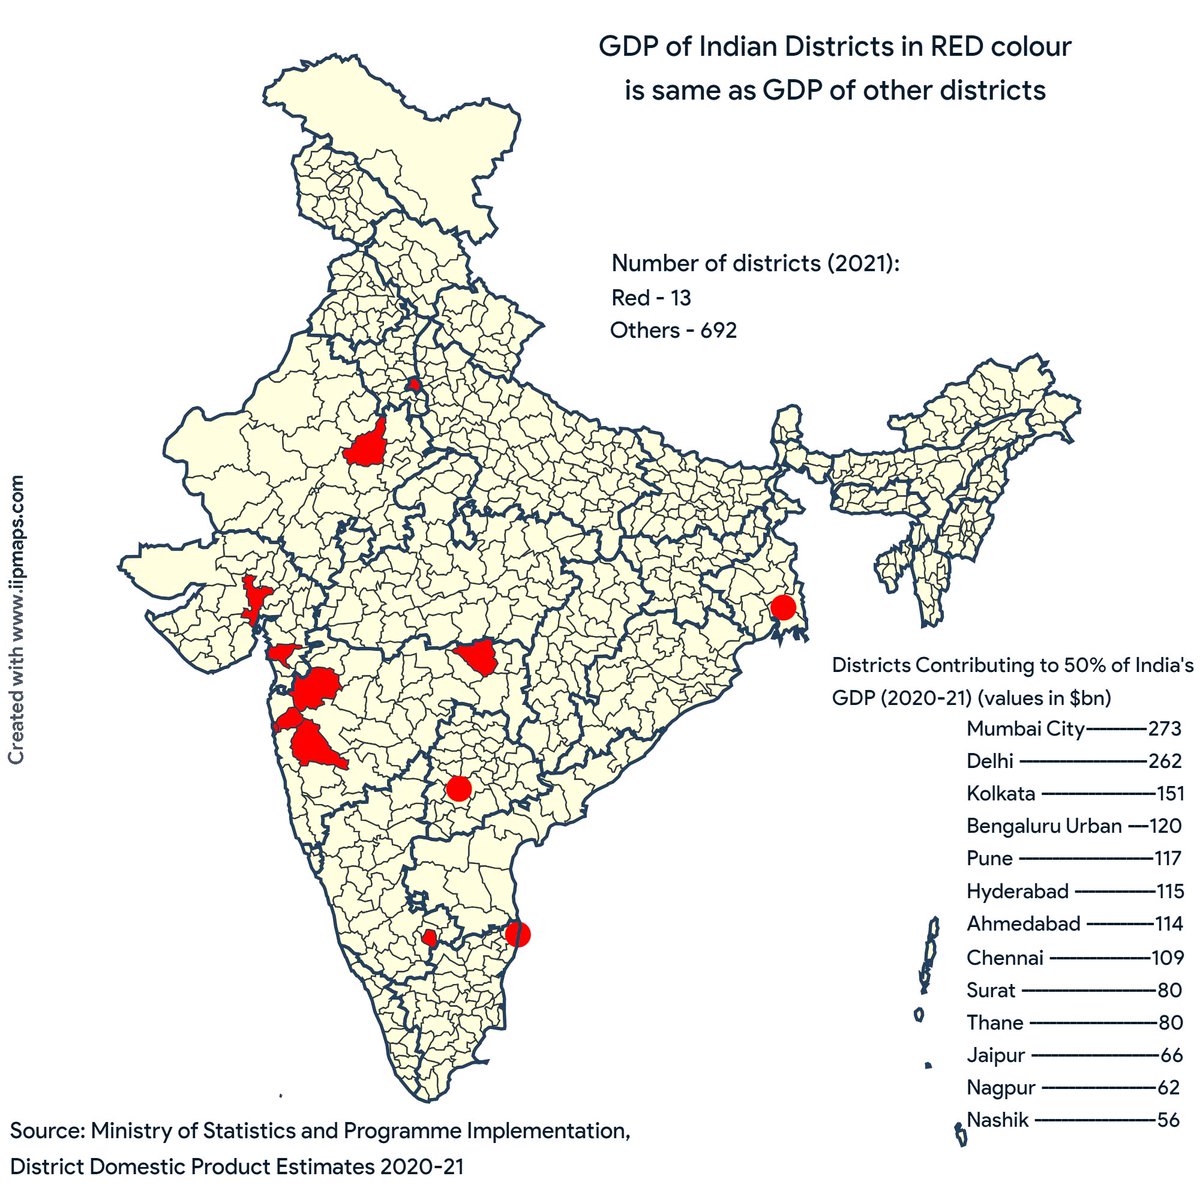 Sunday Surprise: Half of India’s GDP is concentrated in 13 districts/cities. Creation or redistribution of future wealth should be diverse. It will stem migration, increase regional self confidence and spur national integration. What do you think?